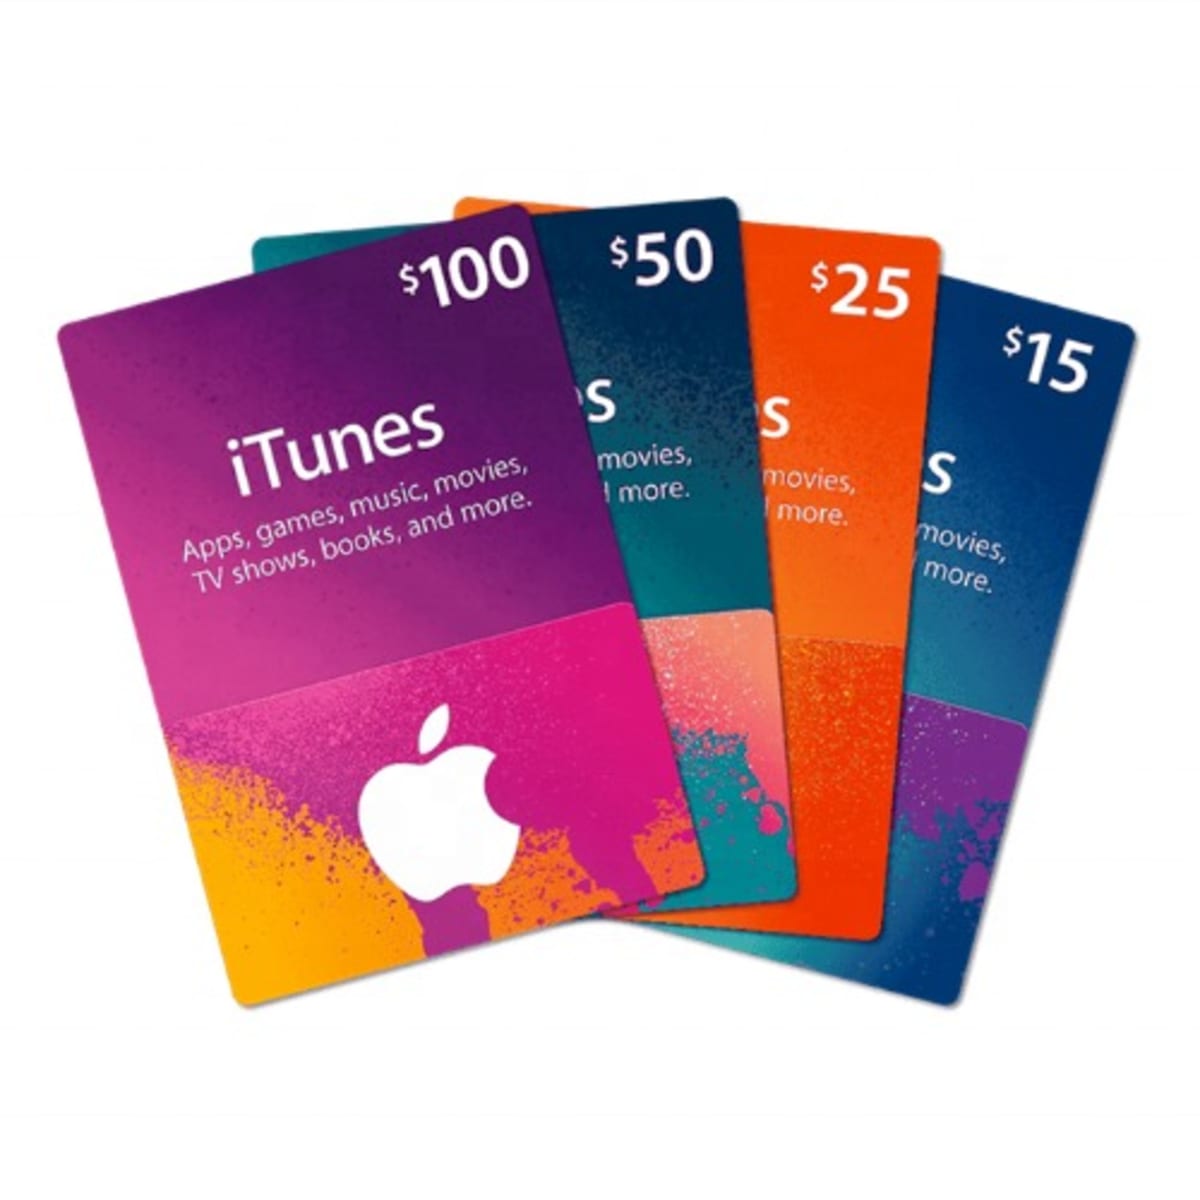 Apple Accents iTunes Gift Card - $10